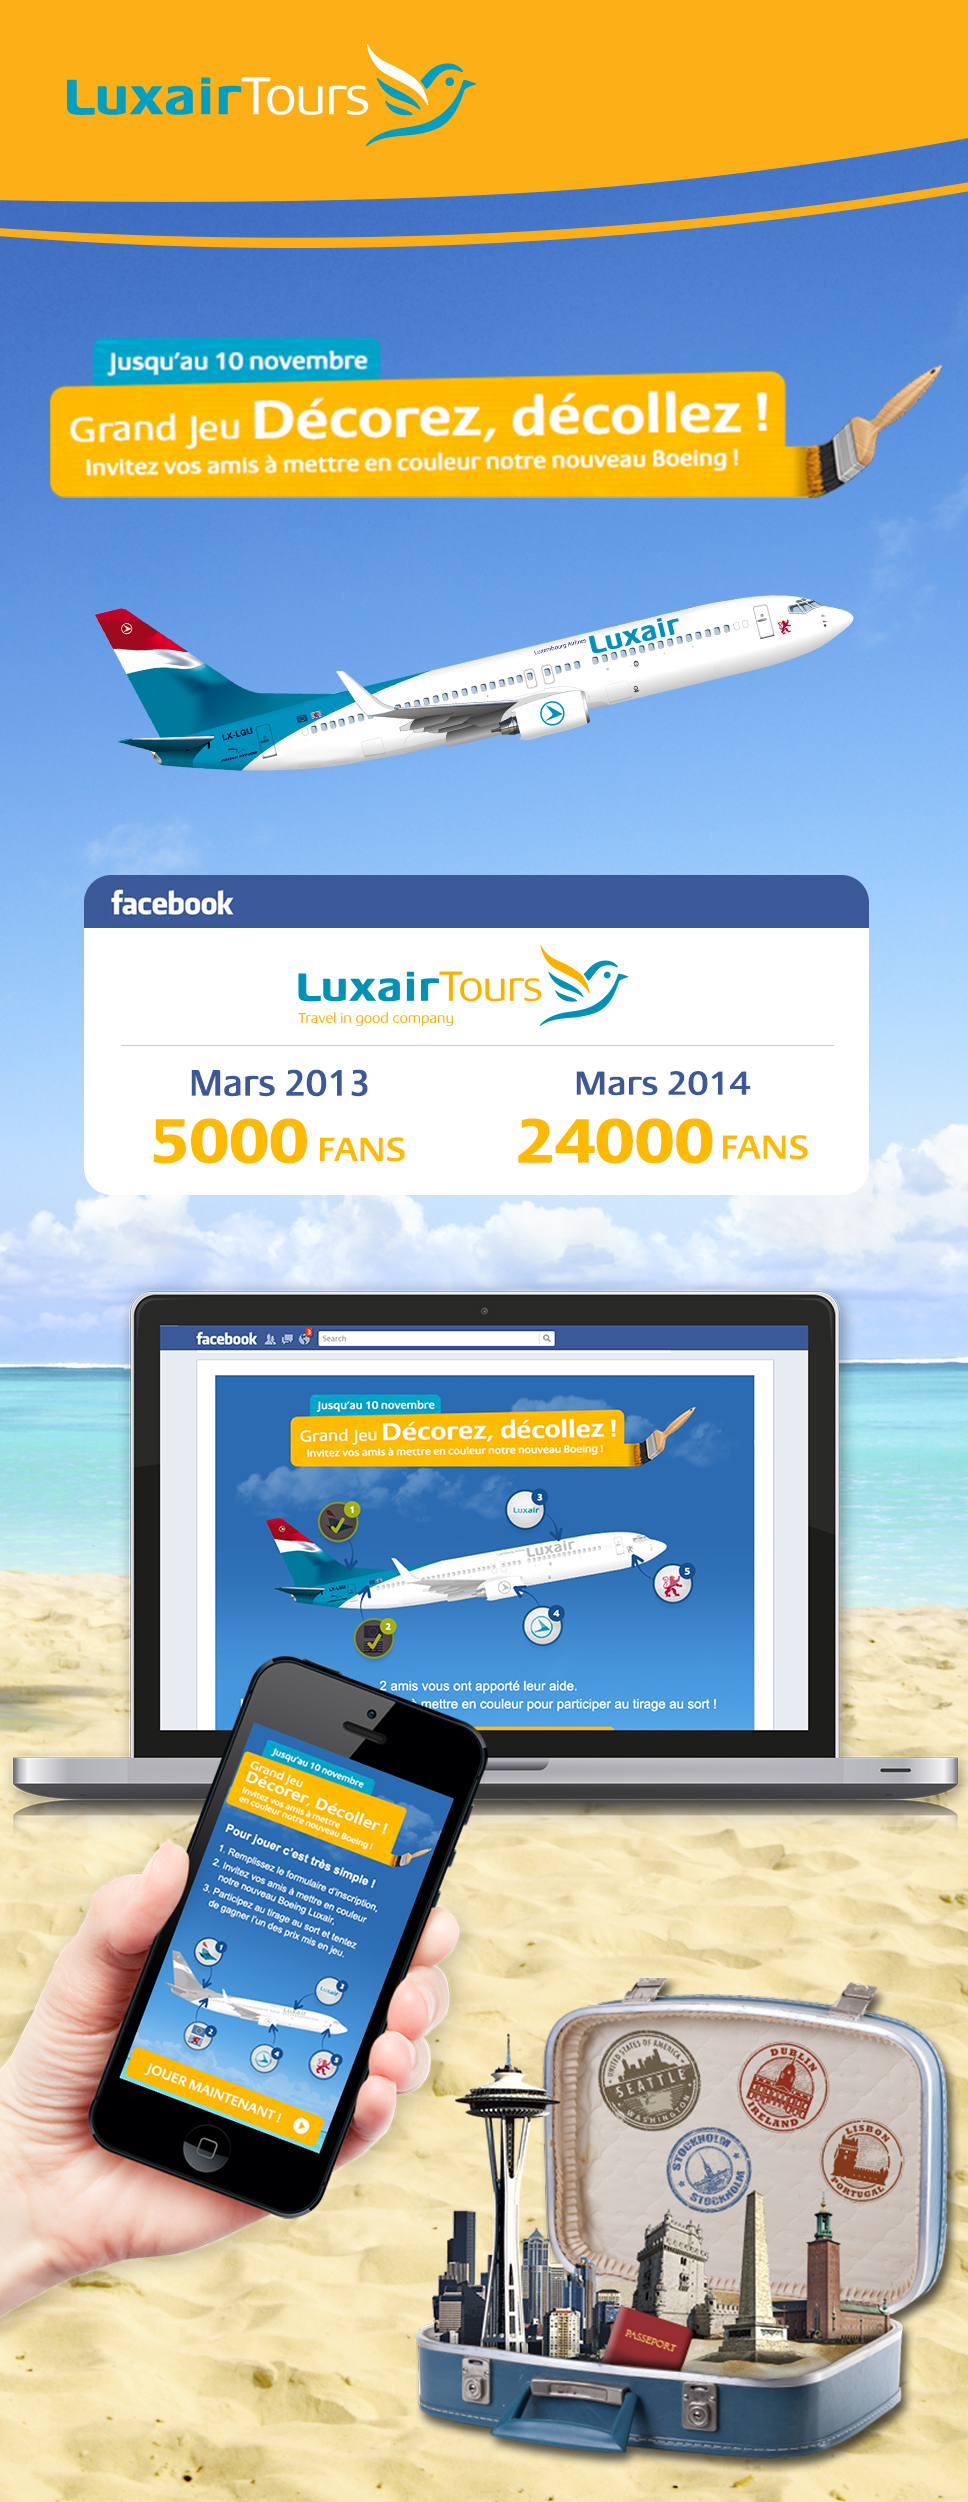 luxairtours-article